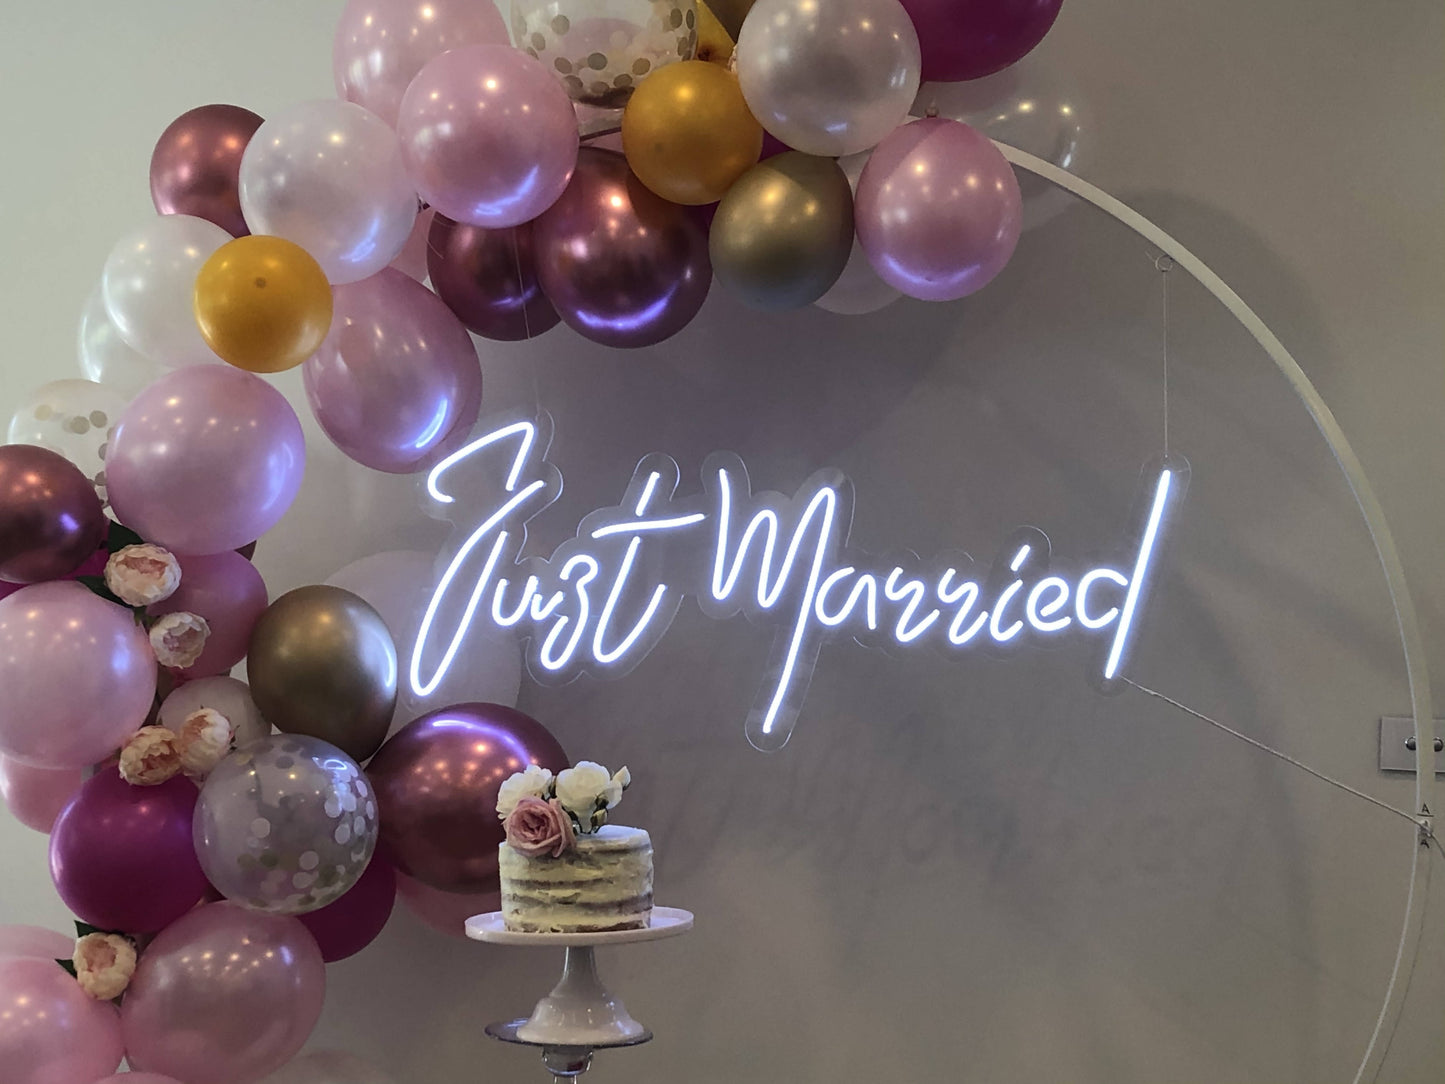 JUST MARRIED NEON HIRE - Live Shopping Tours